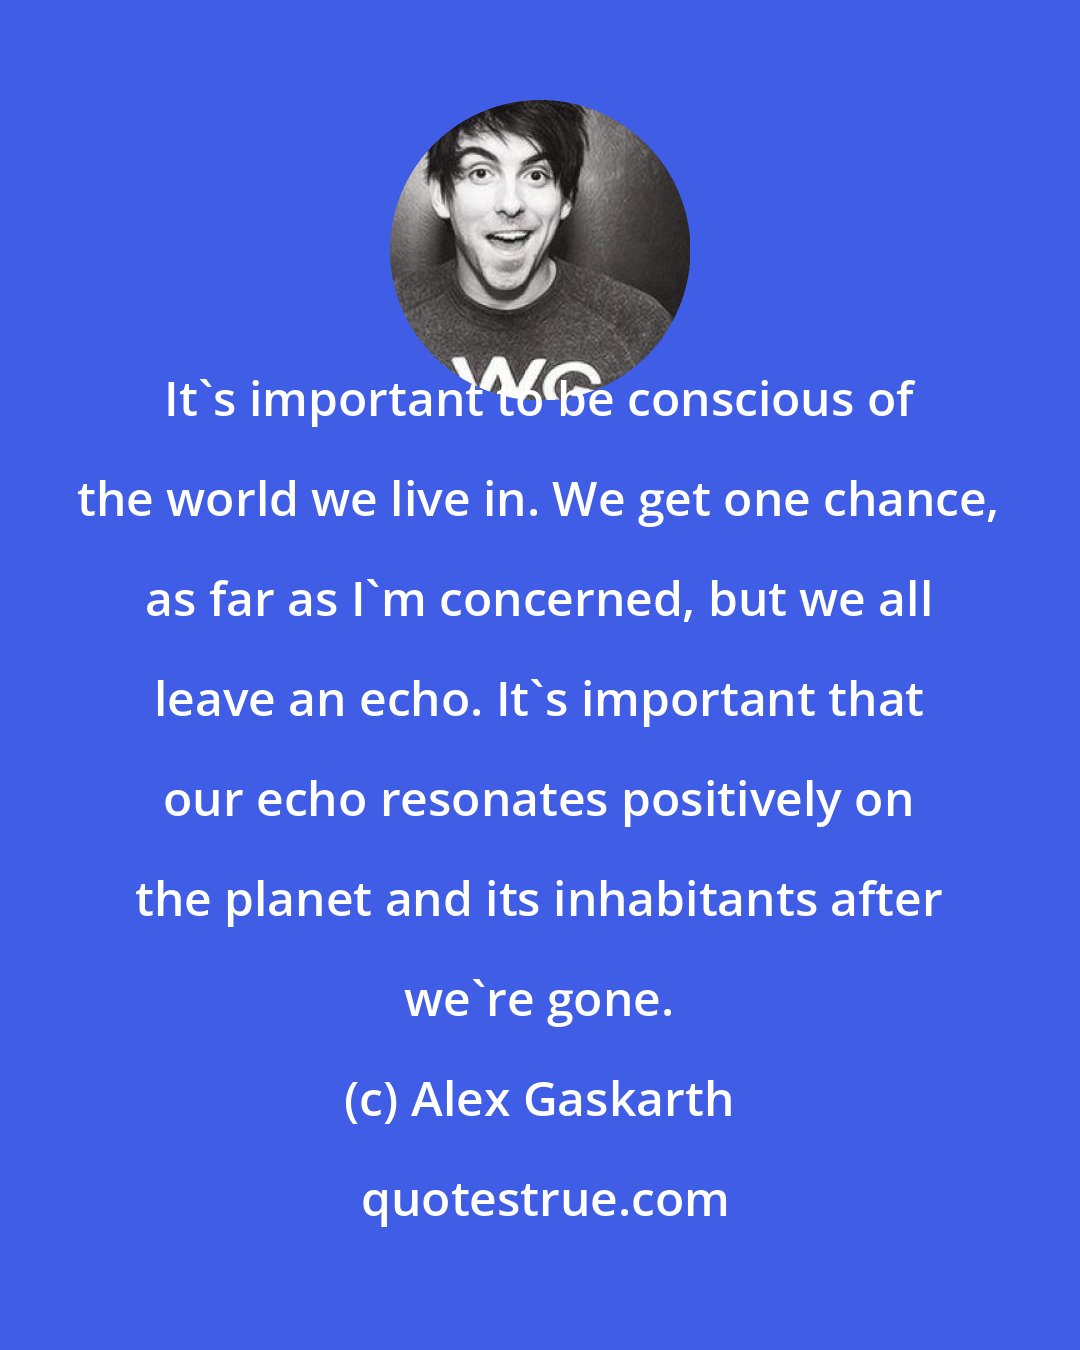 Alex Gaskarth: It's important to be conscious of the world we live in. We get one chance, as far as I'm concerned, but we all leave an echo. It's important that our echo resonates positively on the planet and its inhabitants after we're gone.